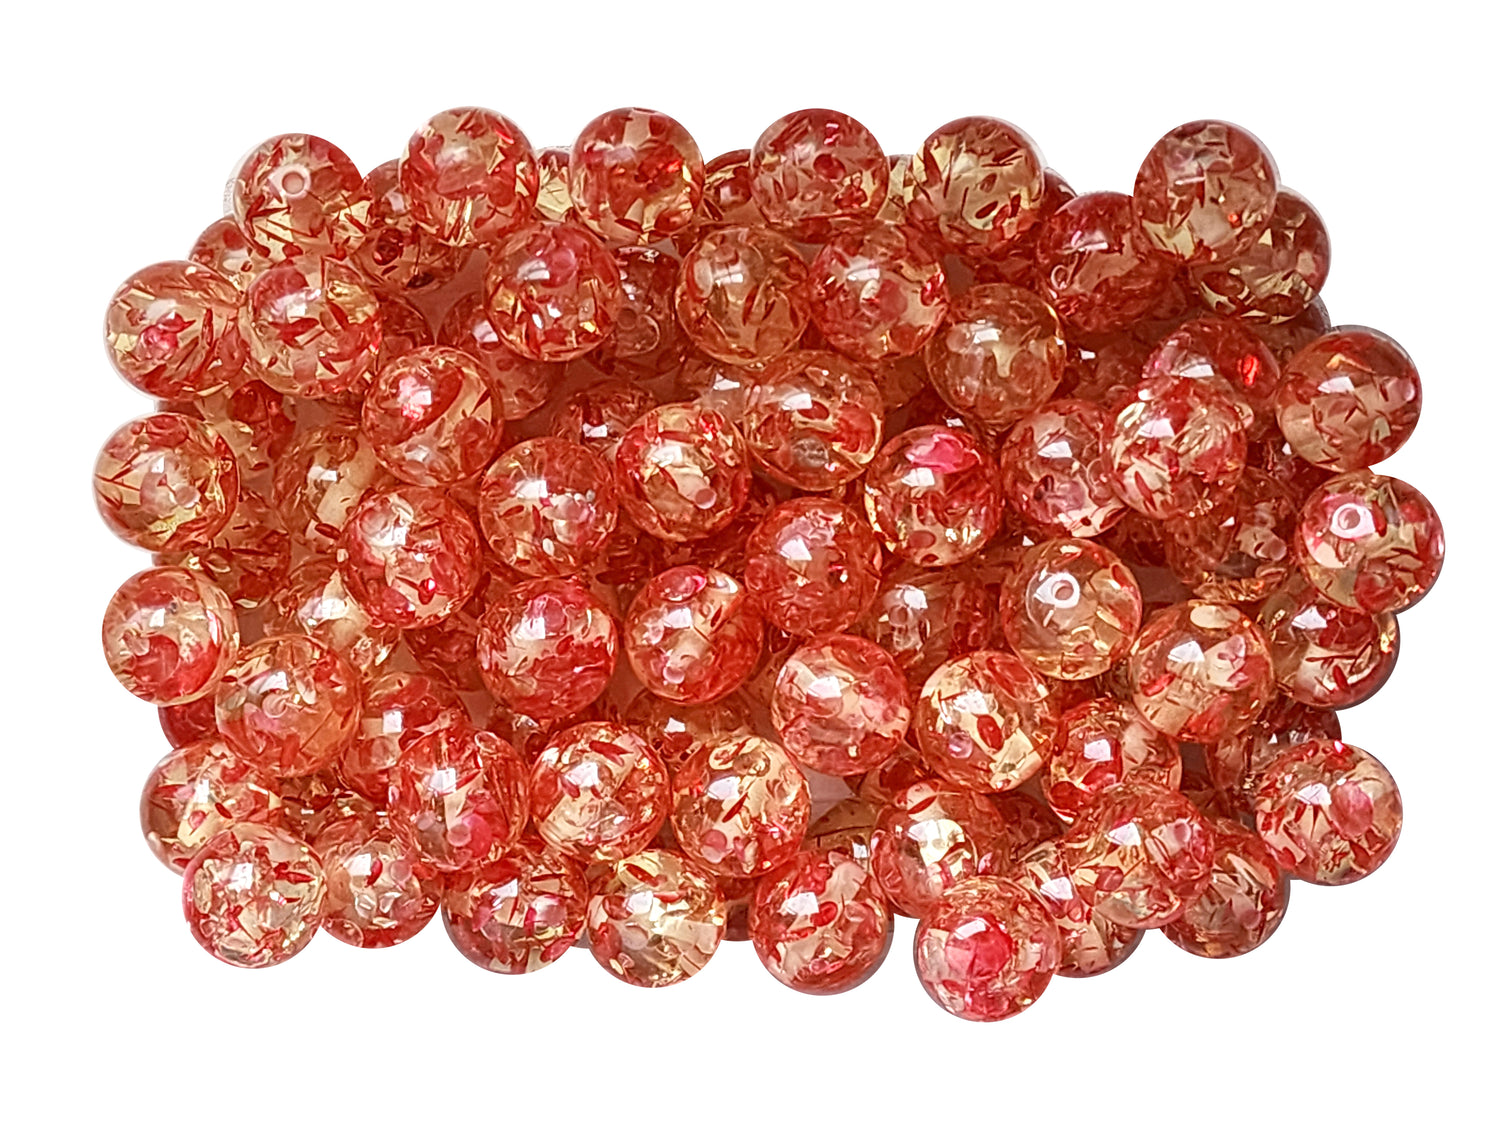 pink stained glass 20mm wholesale bubblegum beads